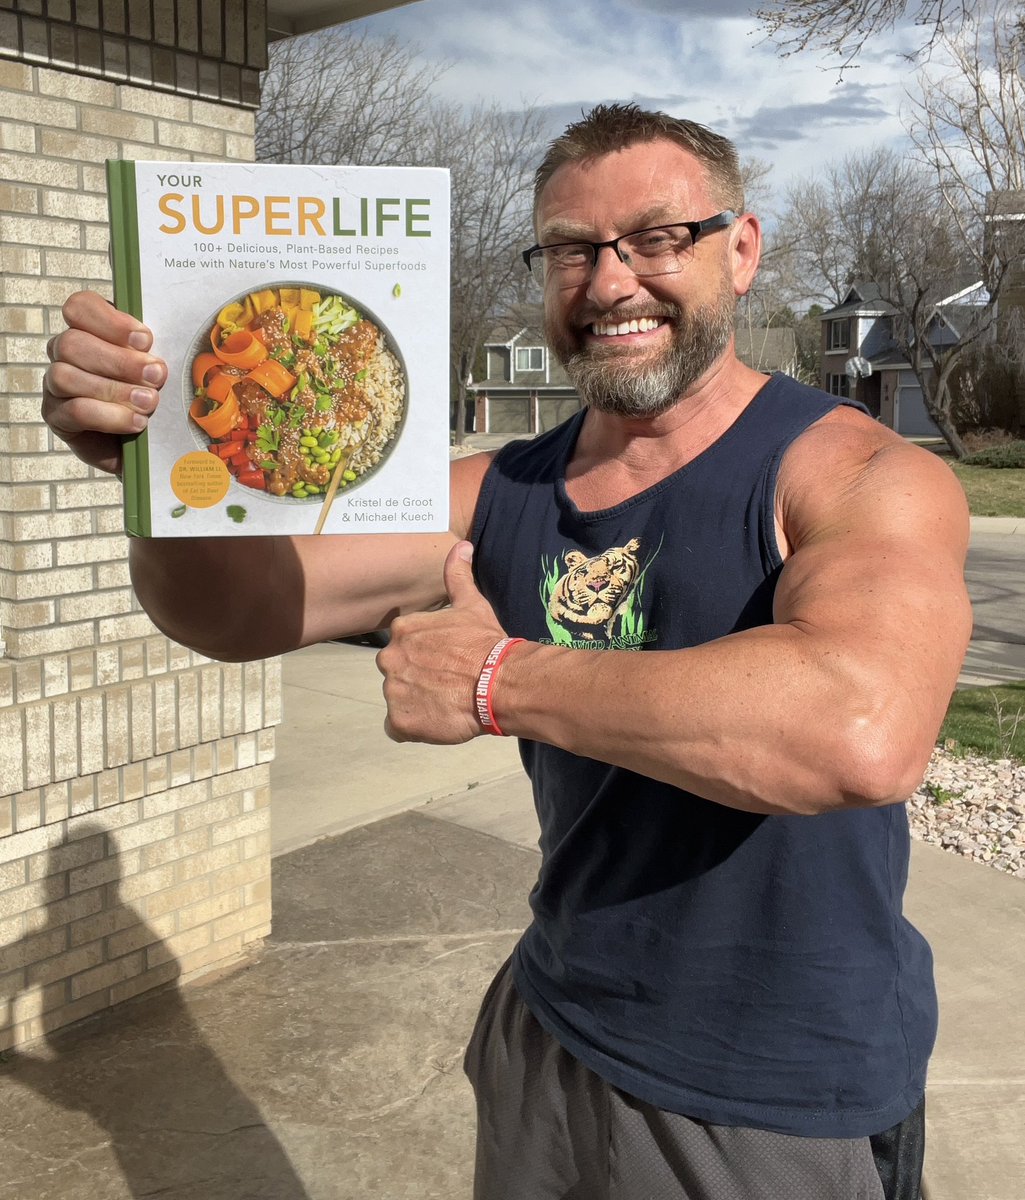 Just got an advance copy of this NEW plant-based cookbook yesterday! 🤩